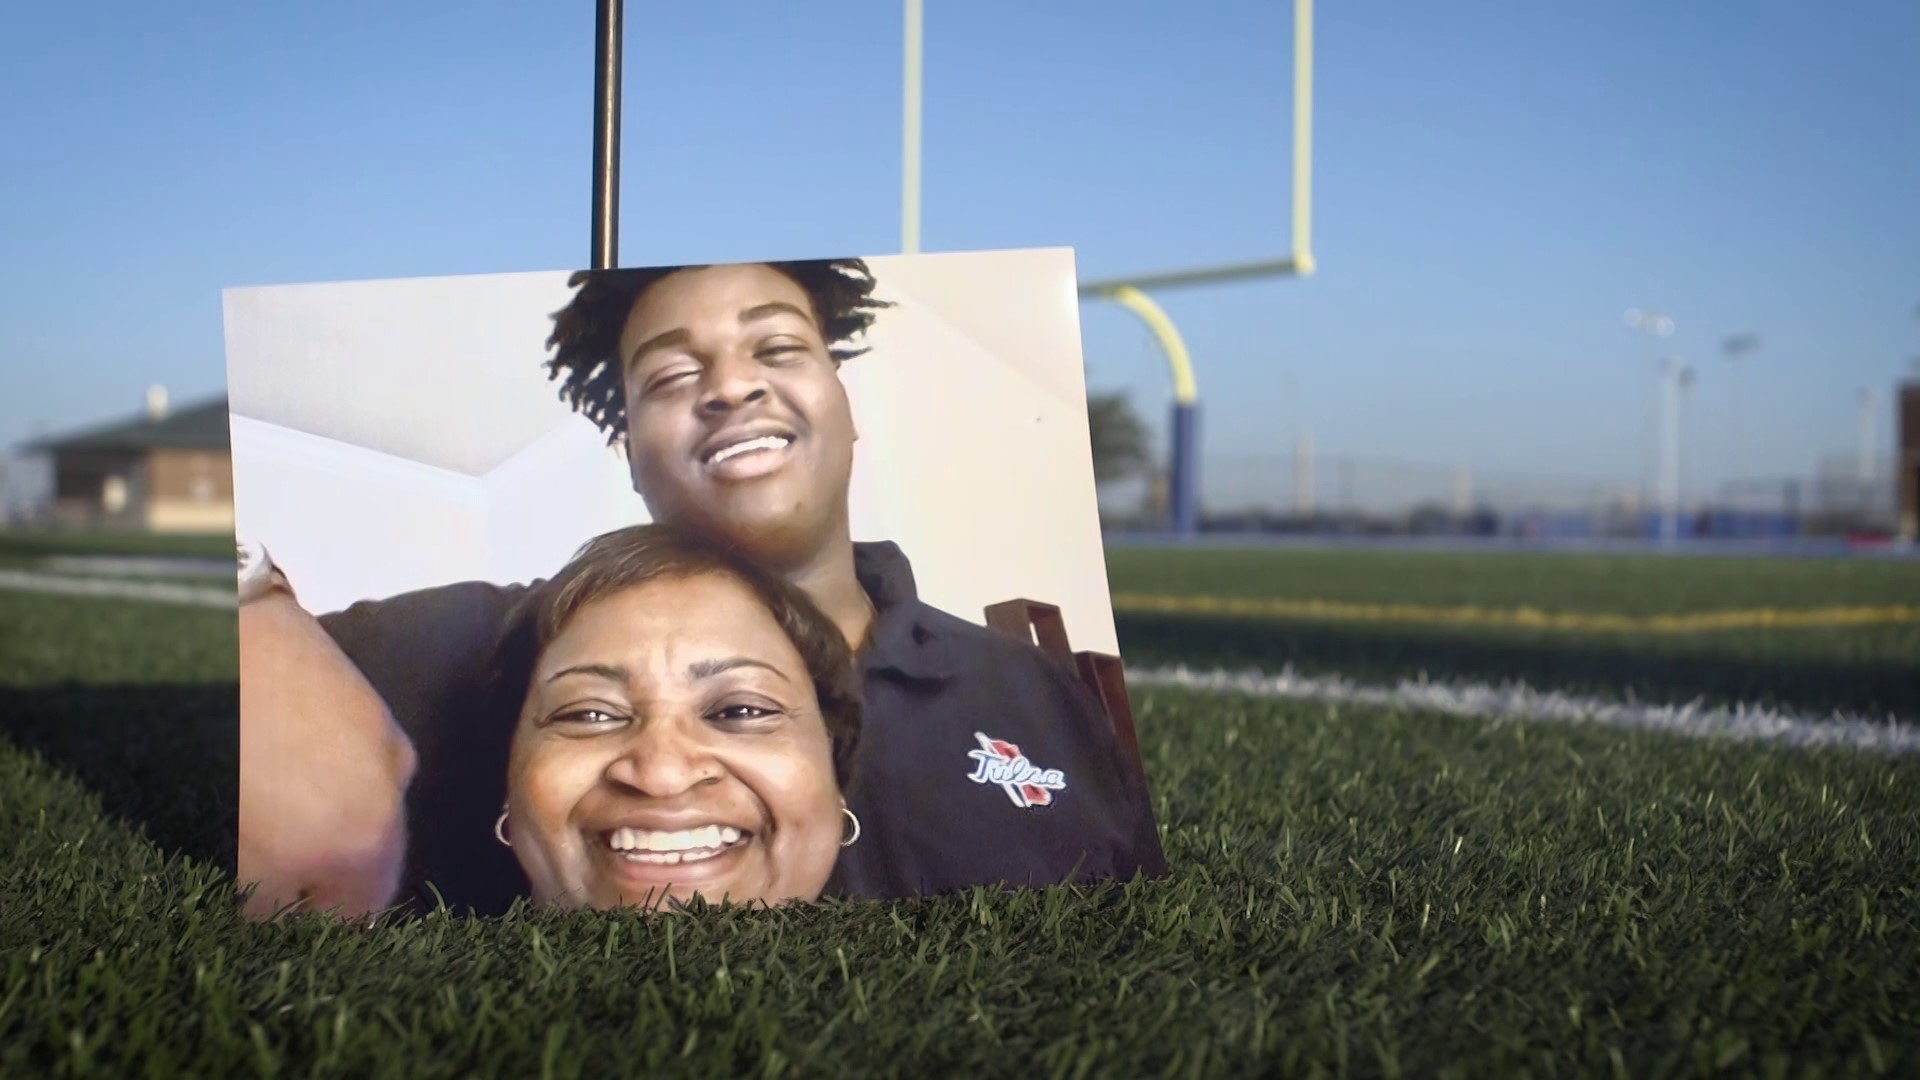 The Dallas Cowboys' first-round selection and newest member of the offensive line introduces WFAA to his mother and sheds light into his upbringing in North Texas